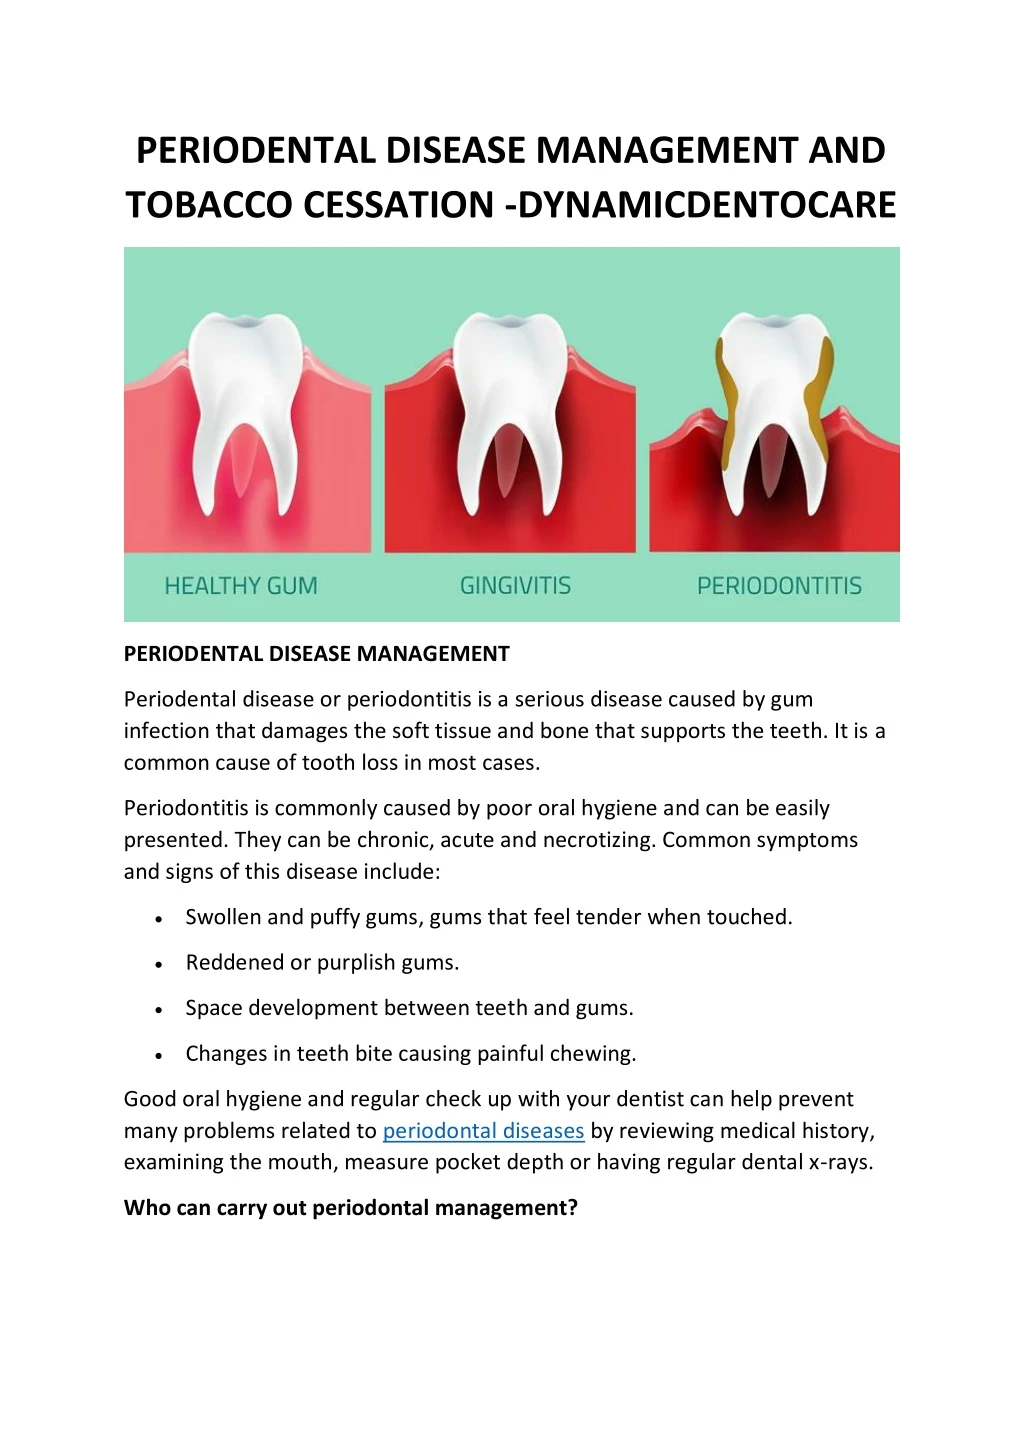 periodental disease management and tobacco